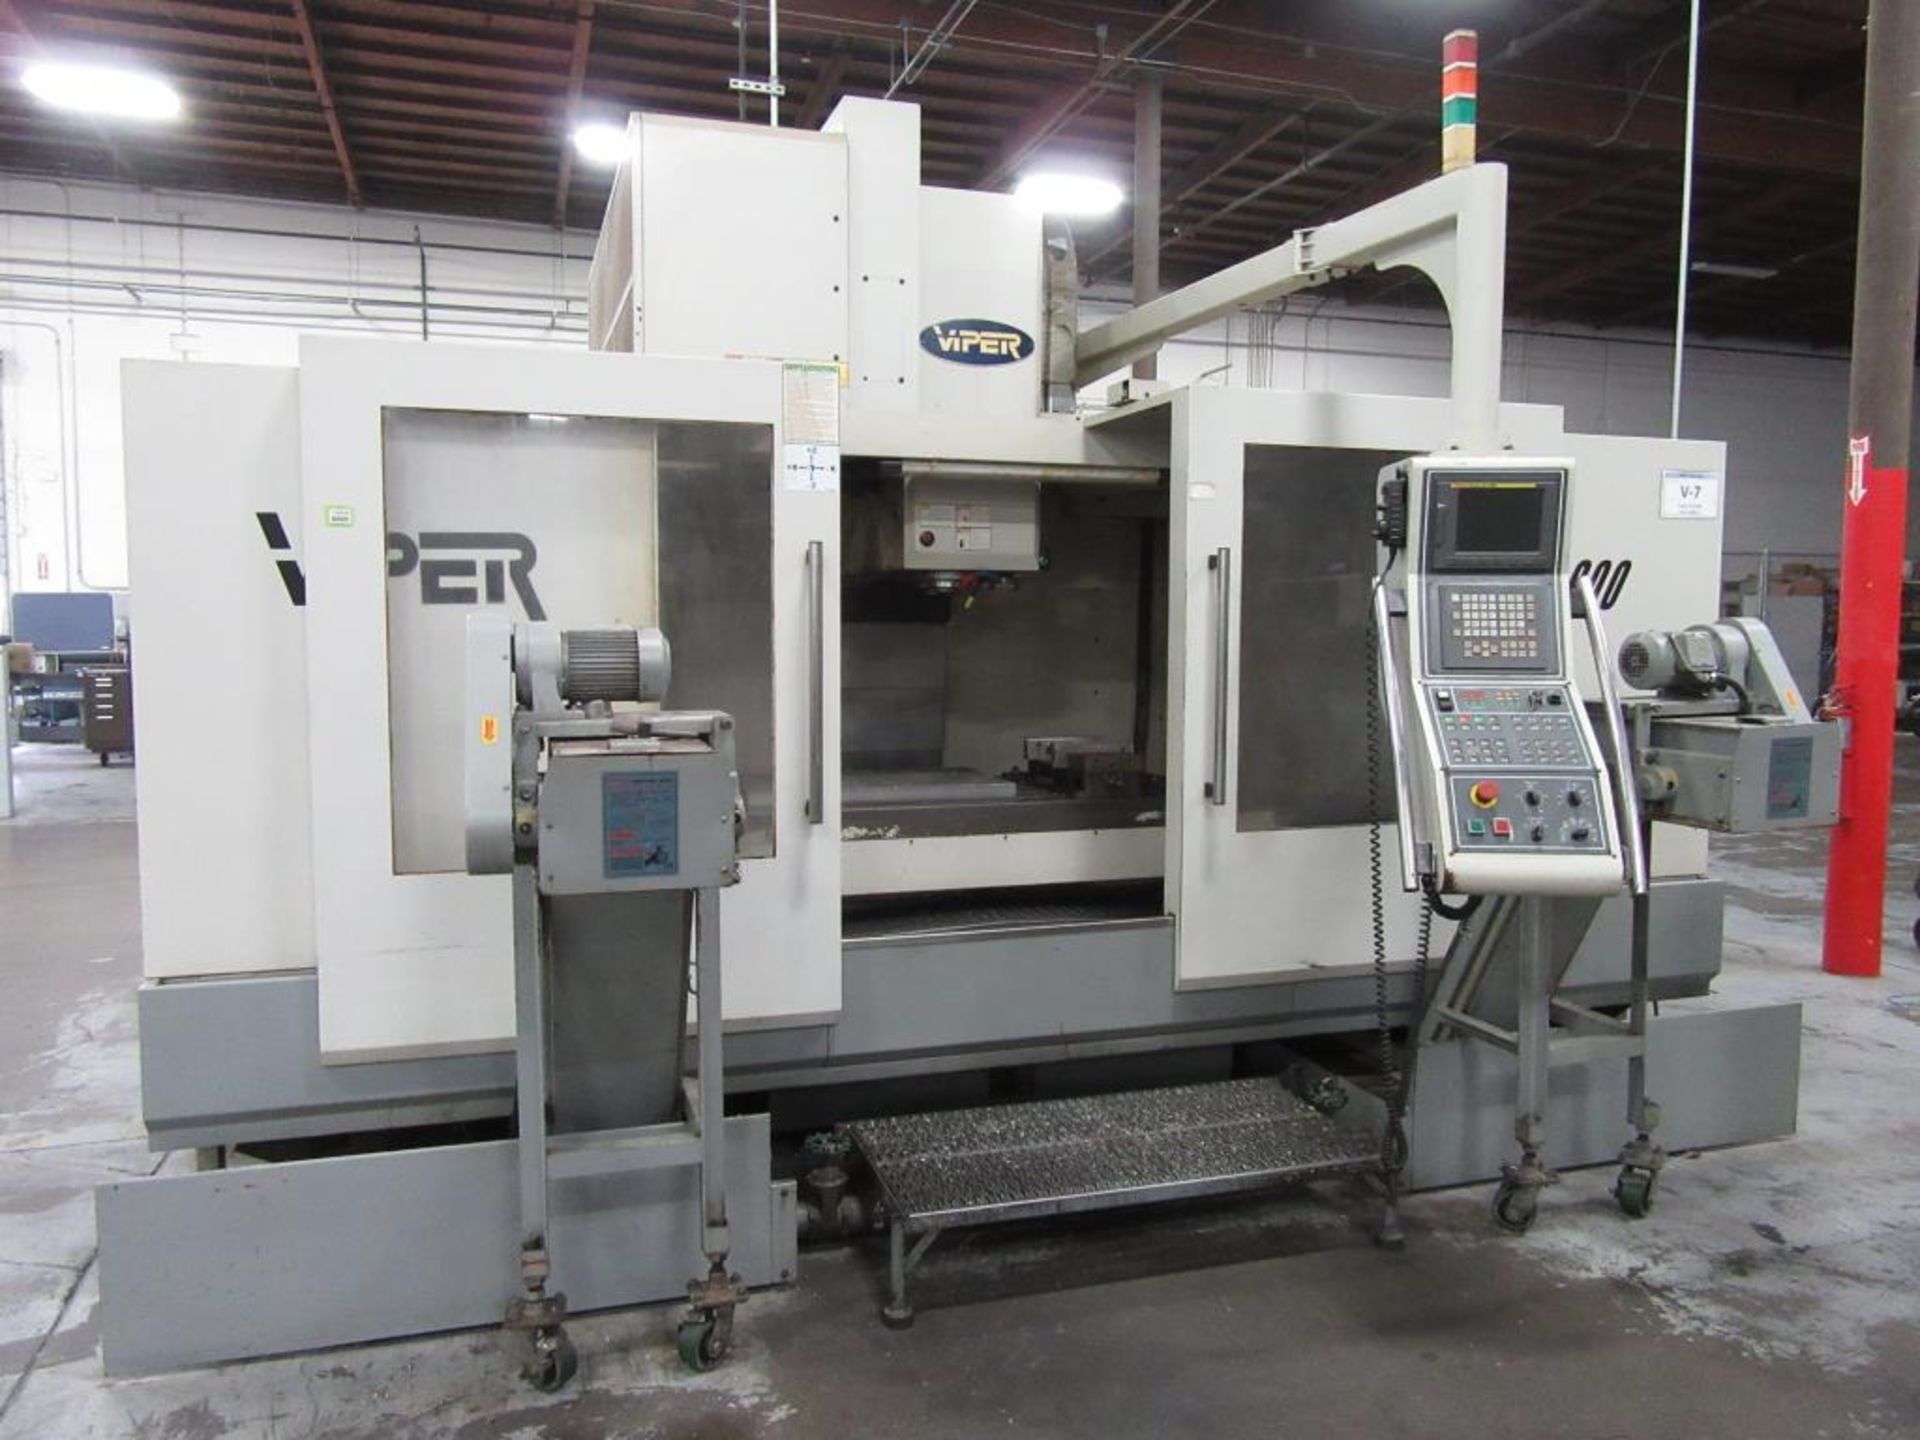 Mighty Viper VMC-1600A. 2006 - CNC Vertical Machining Center with Fanuc 21i-MB 3-Axis Control Panel, - Image 3 of 22